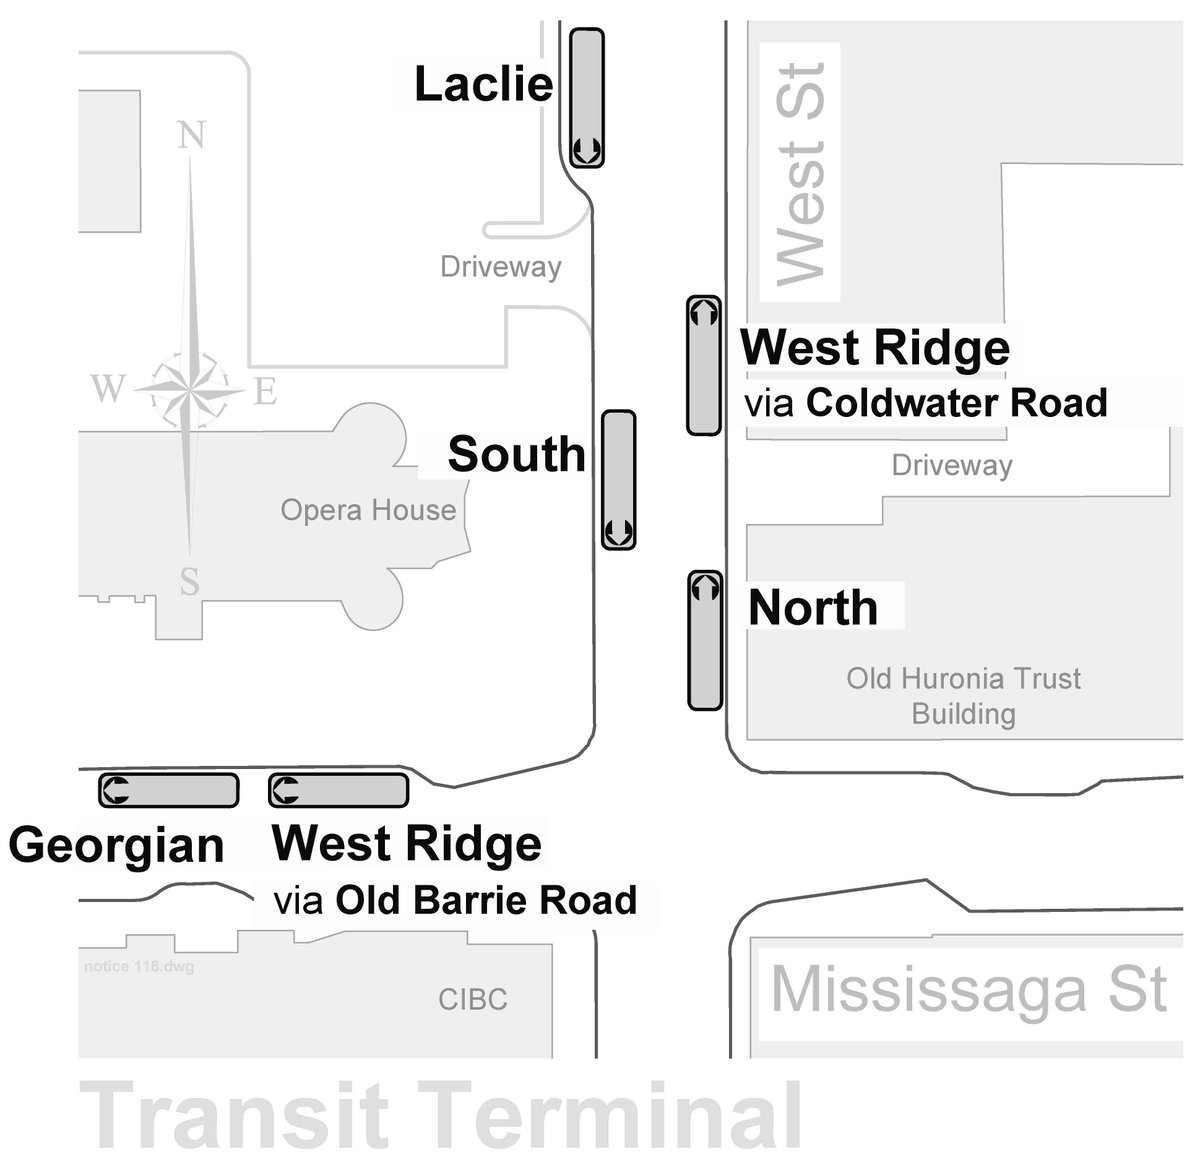 Reminder: Due to scheduled maintenance, the #Orillia Transit Laclie Route bus will be arriving & boarding in the bus layby adjacent to the Orillia Public Library/Municipal Parking Lot #4 for a portion of the day today, Tuesday, May 14.

Learn more: orillia.ca/en/news/Laclie…